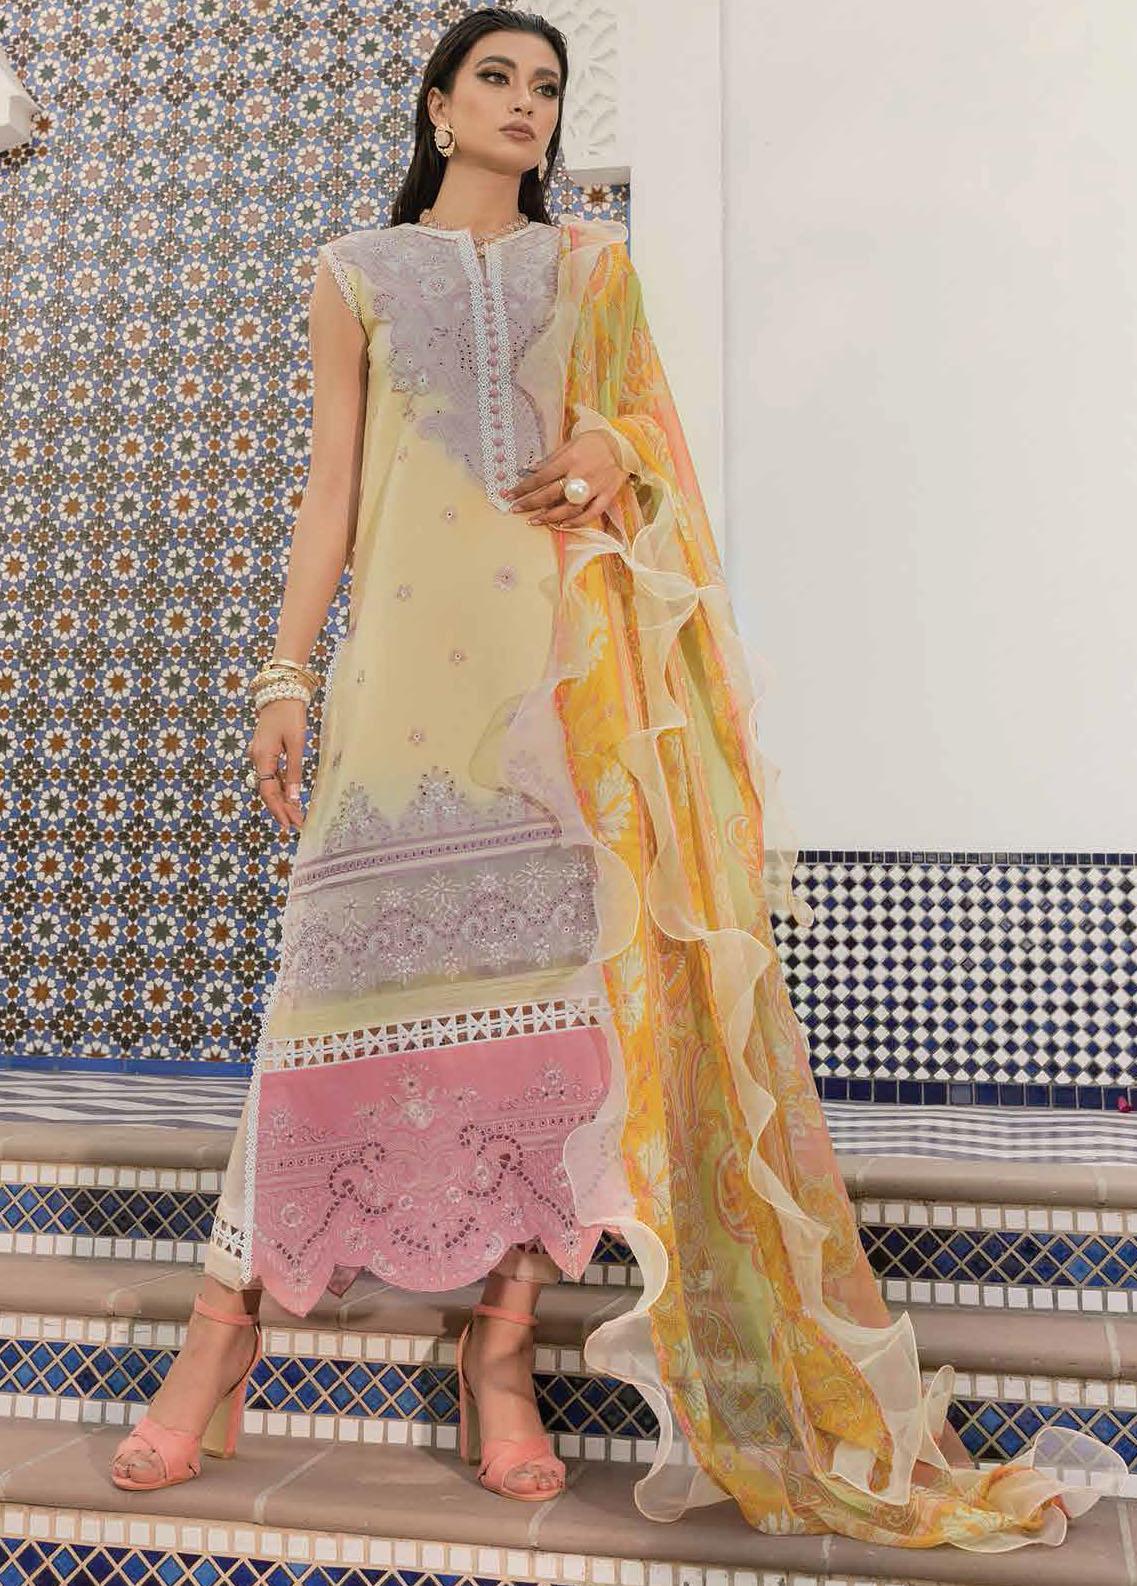 Hemline By Mushq Embroidered Lawn Suit Unstitched 3 Piece 01B Peach Peony MHL22 - Summer Collection